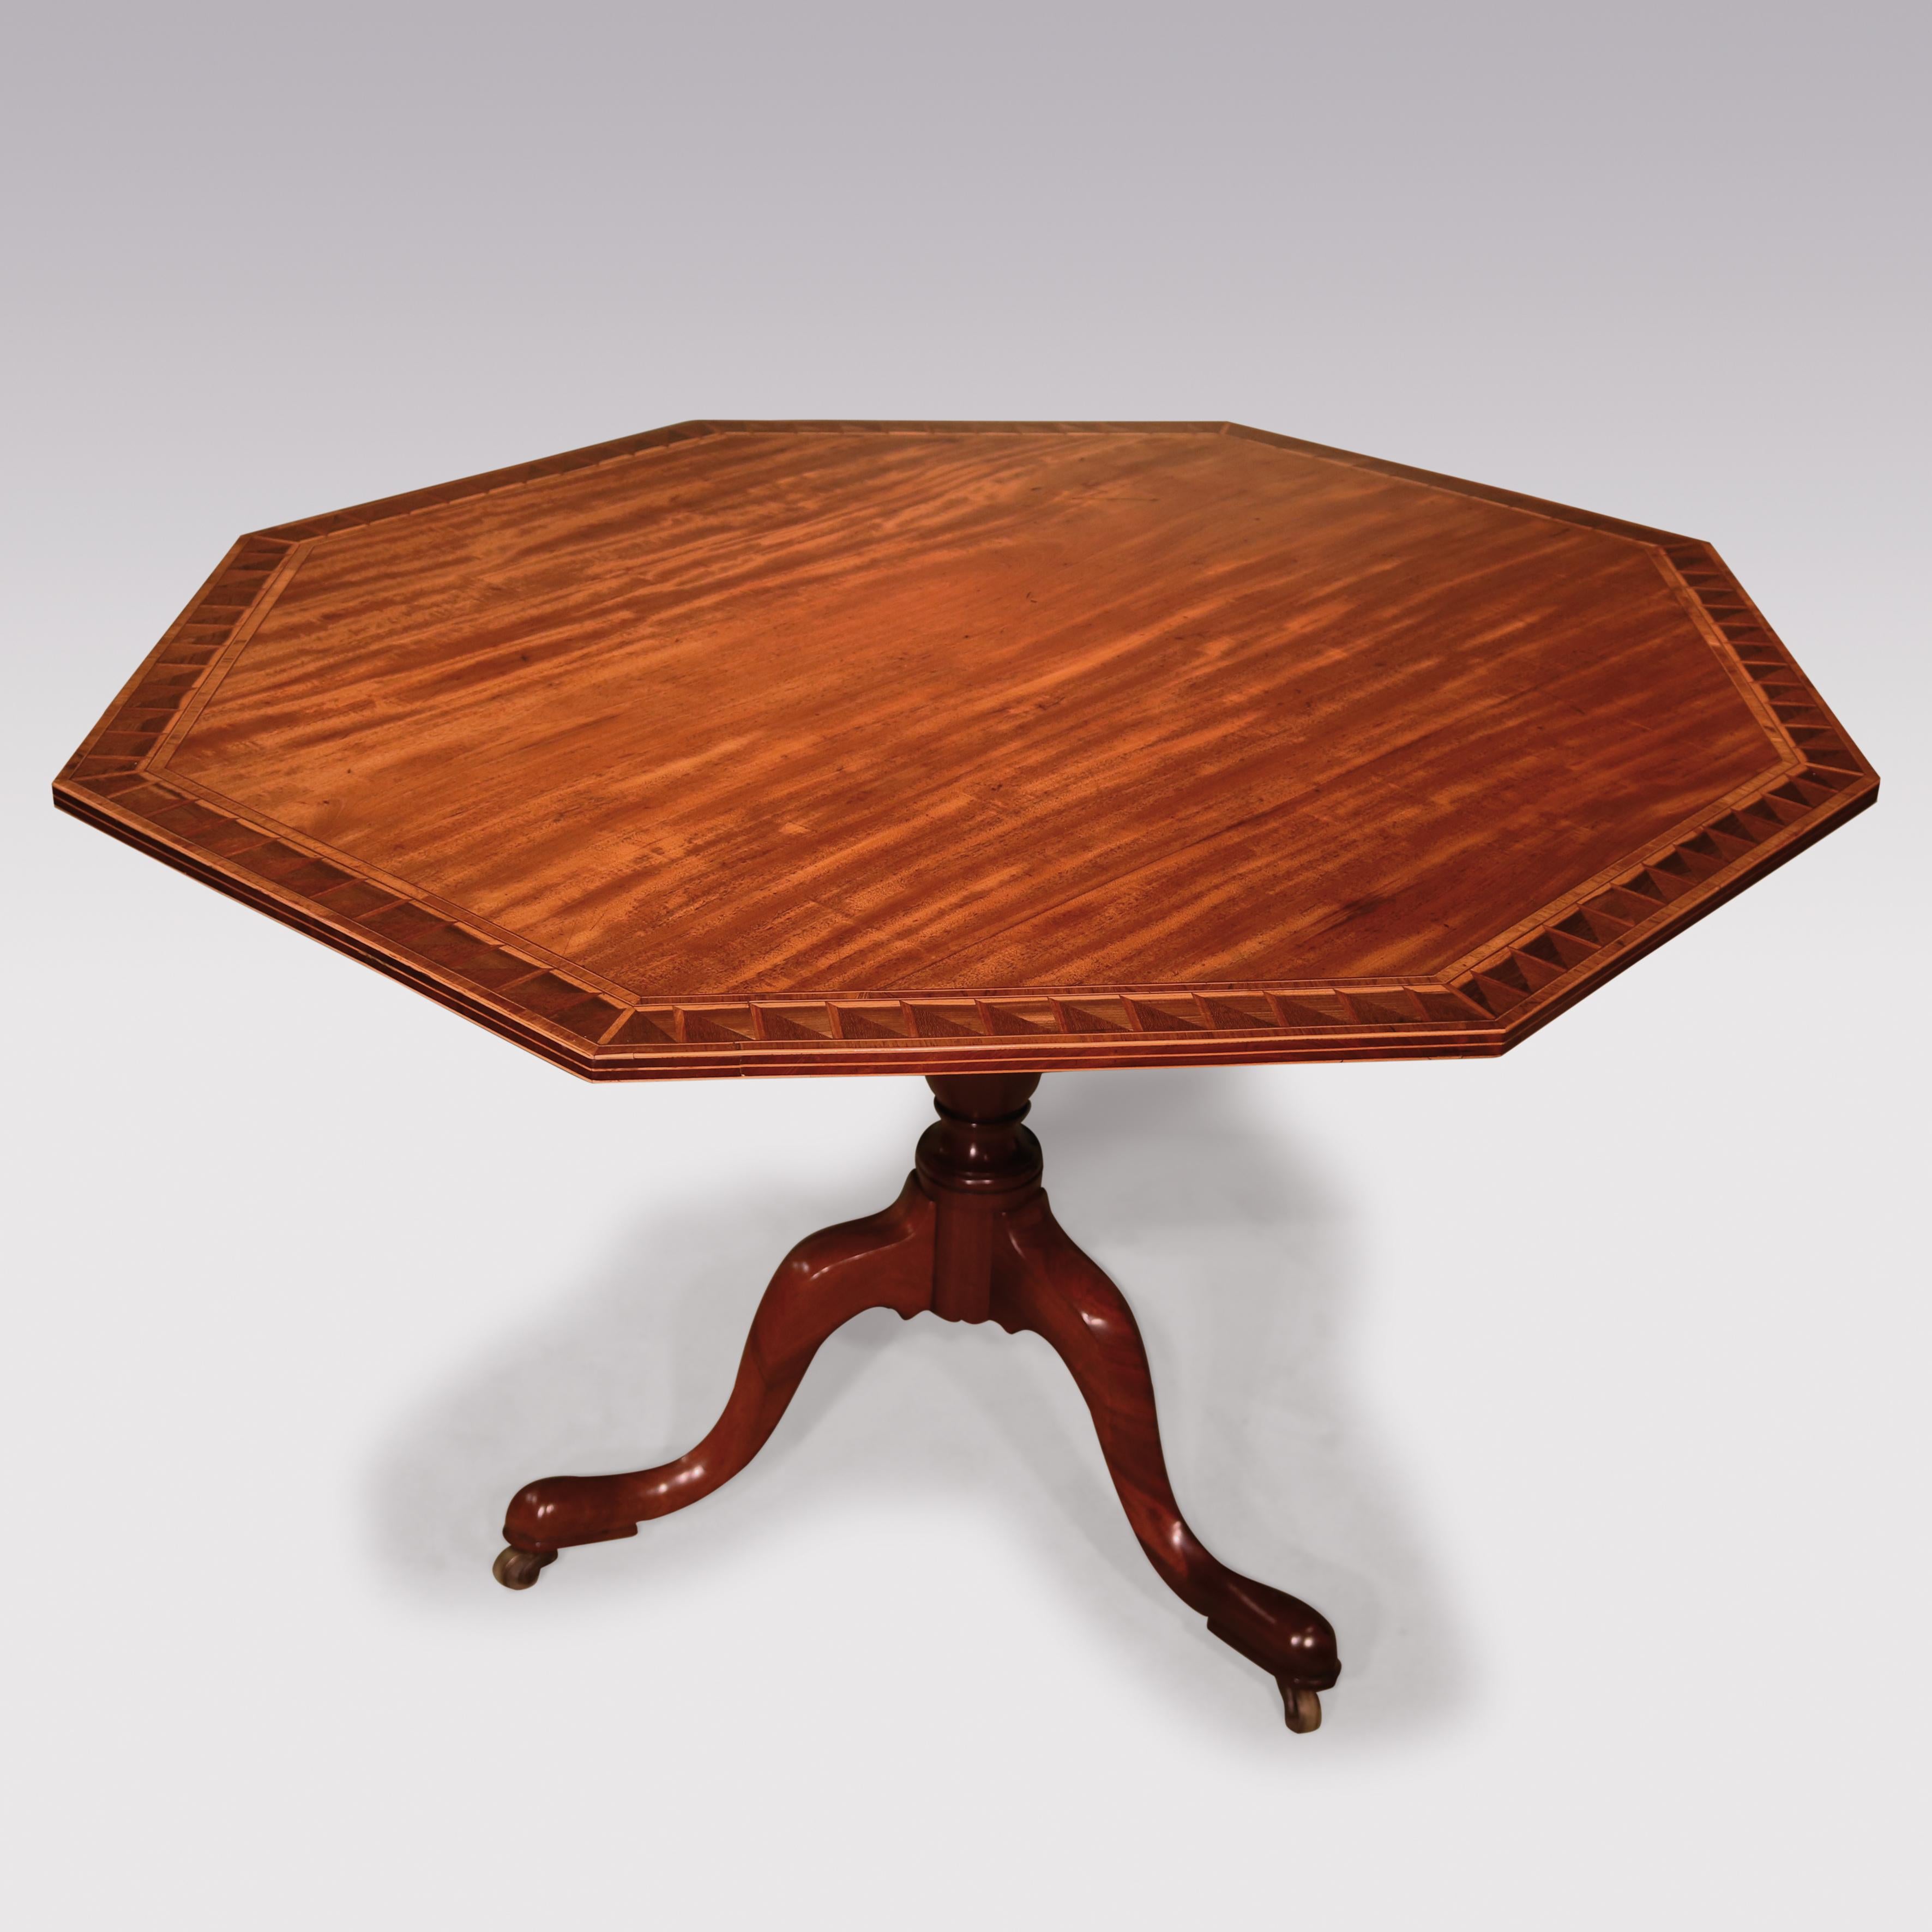 A fine George III period figured mahogany octagonal breakfast table, with boxwood line-inlaid edged top having unusual tulipwood banding enclosing coromandel & padoukwood inlaid panels, supported on vase-turned stem ending on well-shaped tripod legs